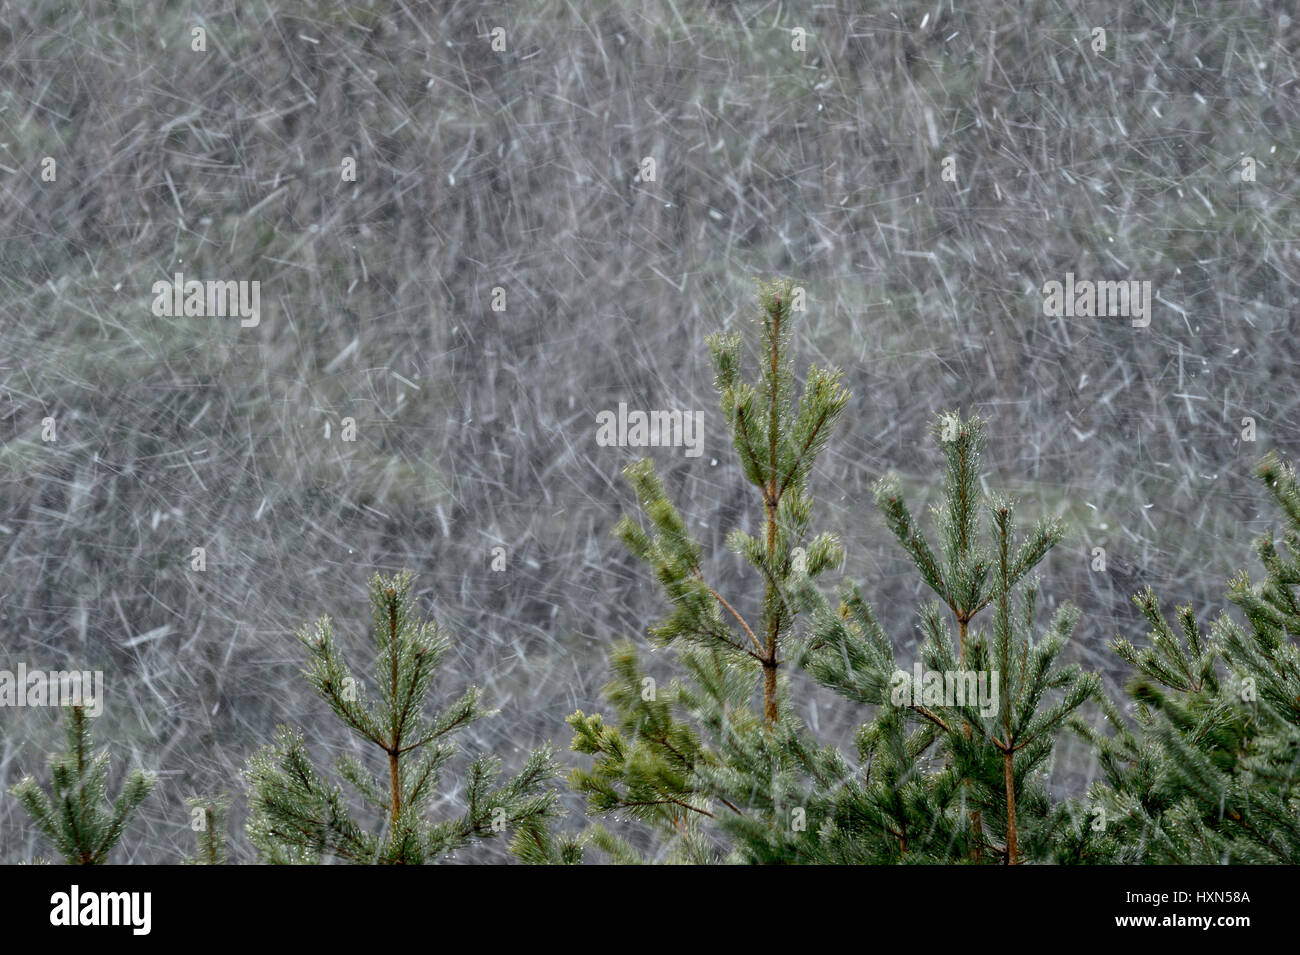 Scots pine (Pinus sylvestris) trees in flurry of snow. Cairngorms National Park, Scotland. February. Stock Photo